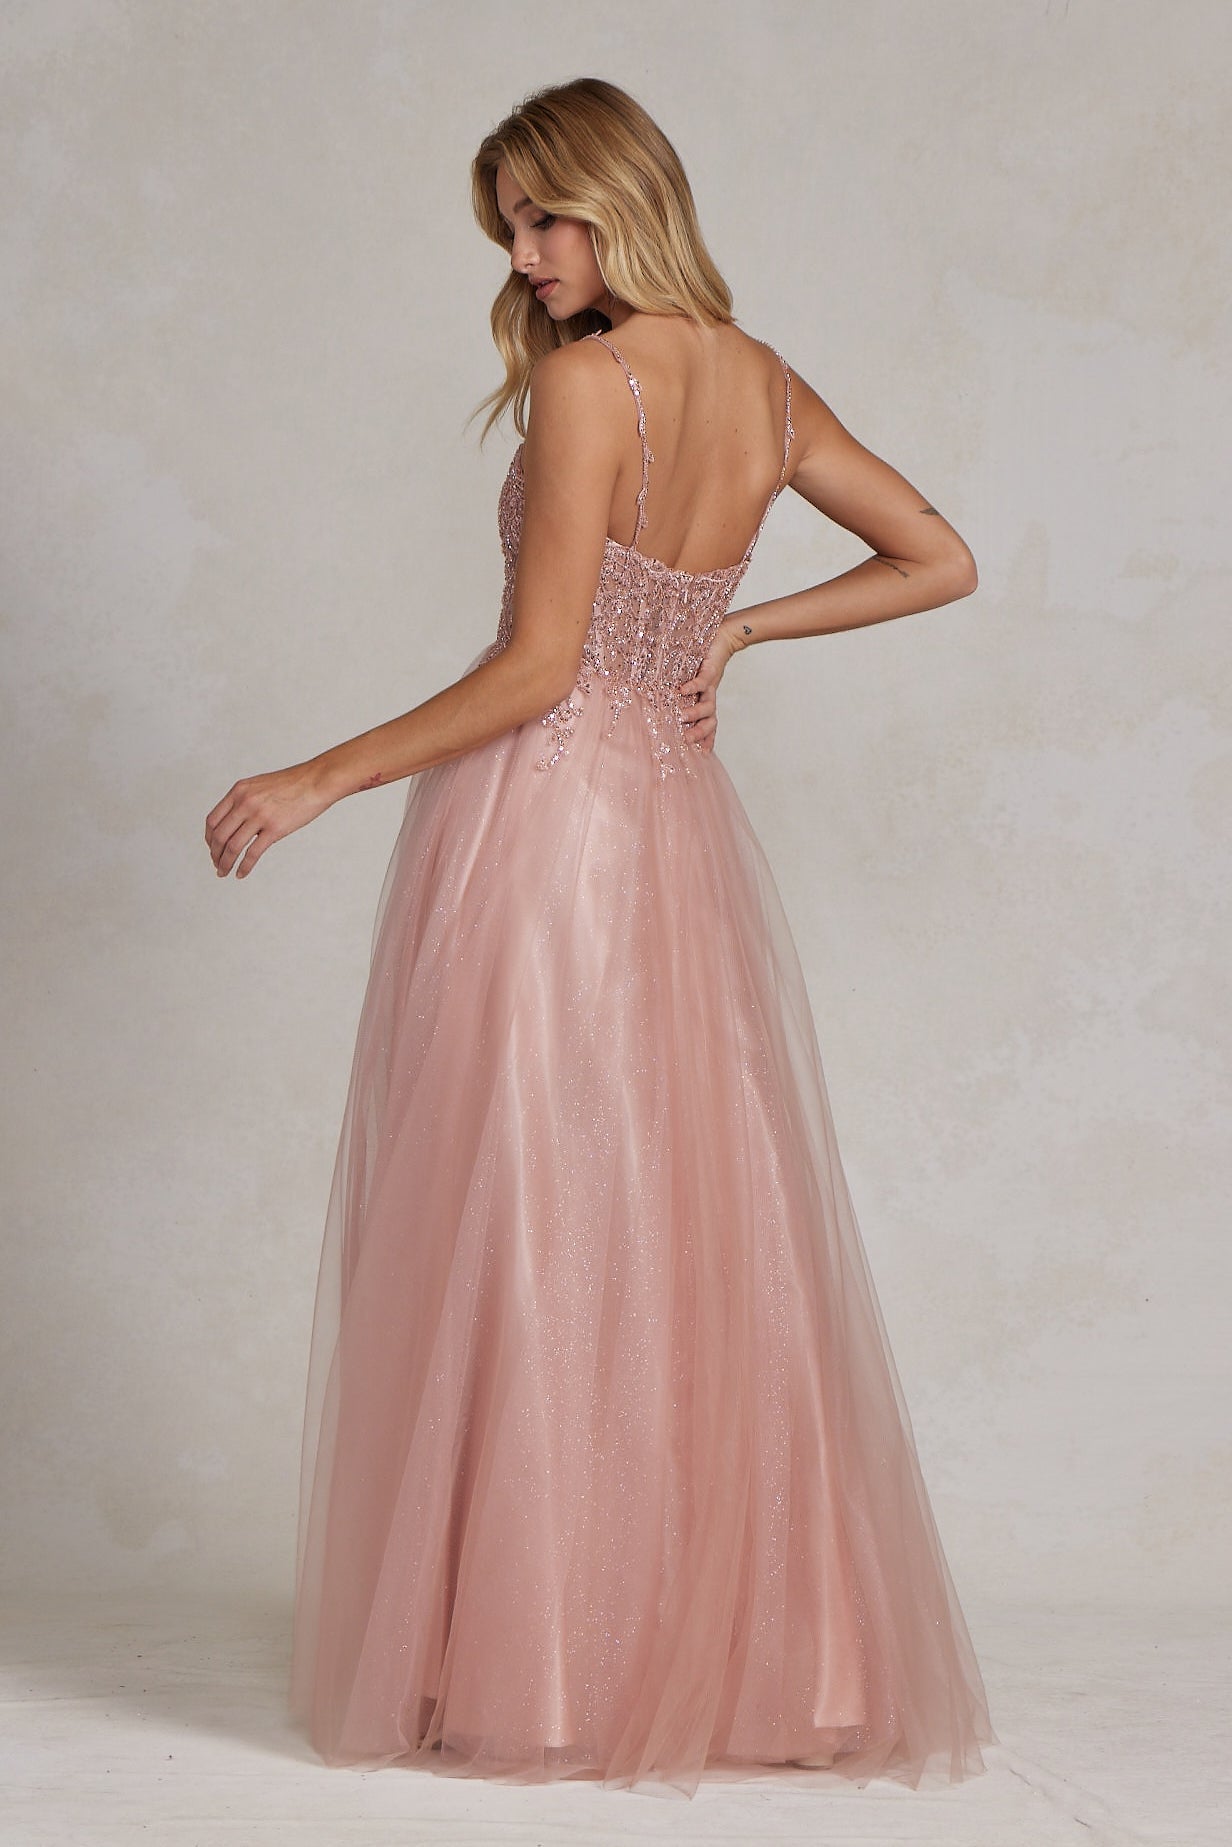 Embroidered Beads Tulle Skirt Open Back Long Prom Dress NXF1086 Elsy Style Prom Dress